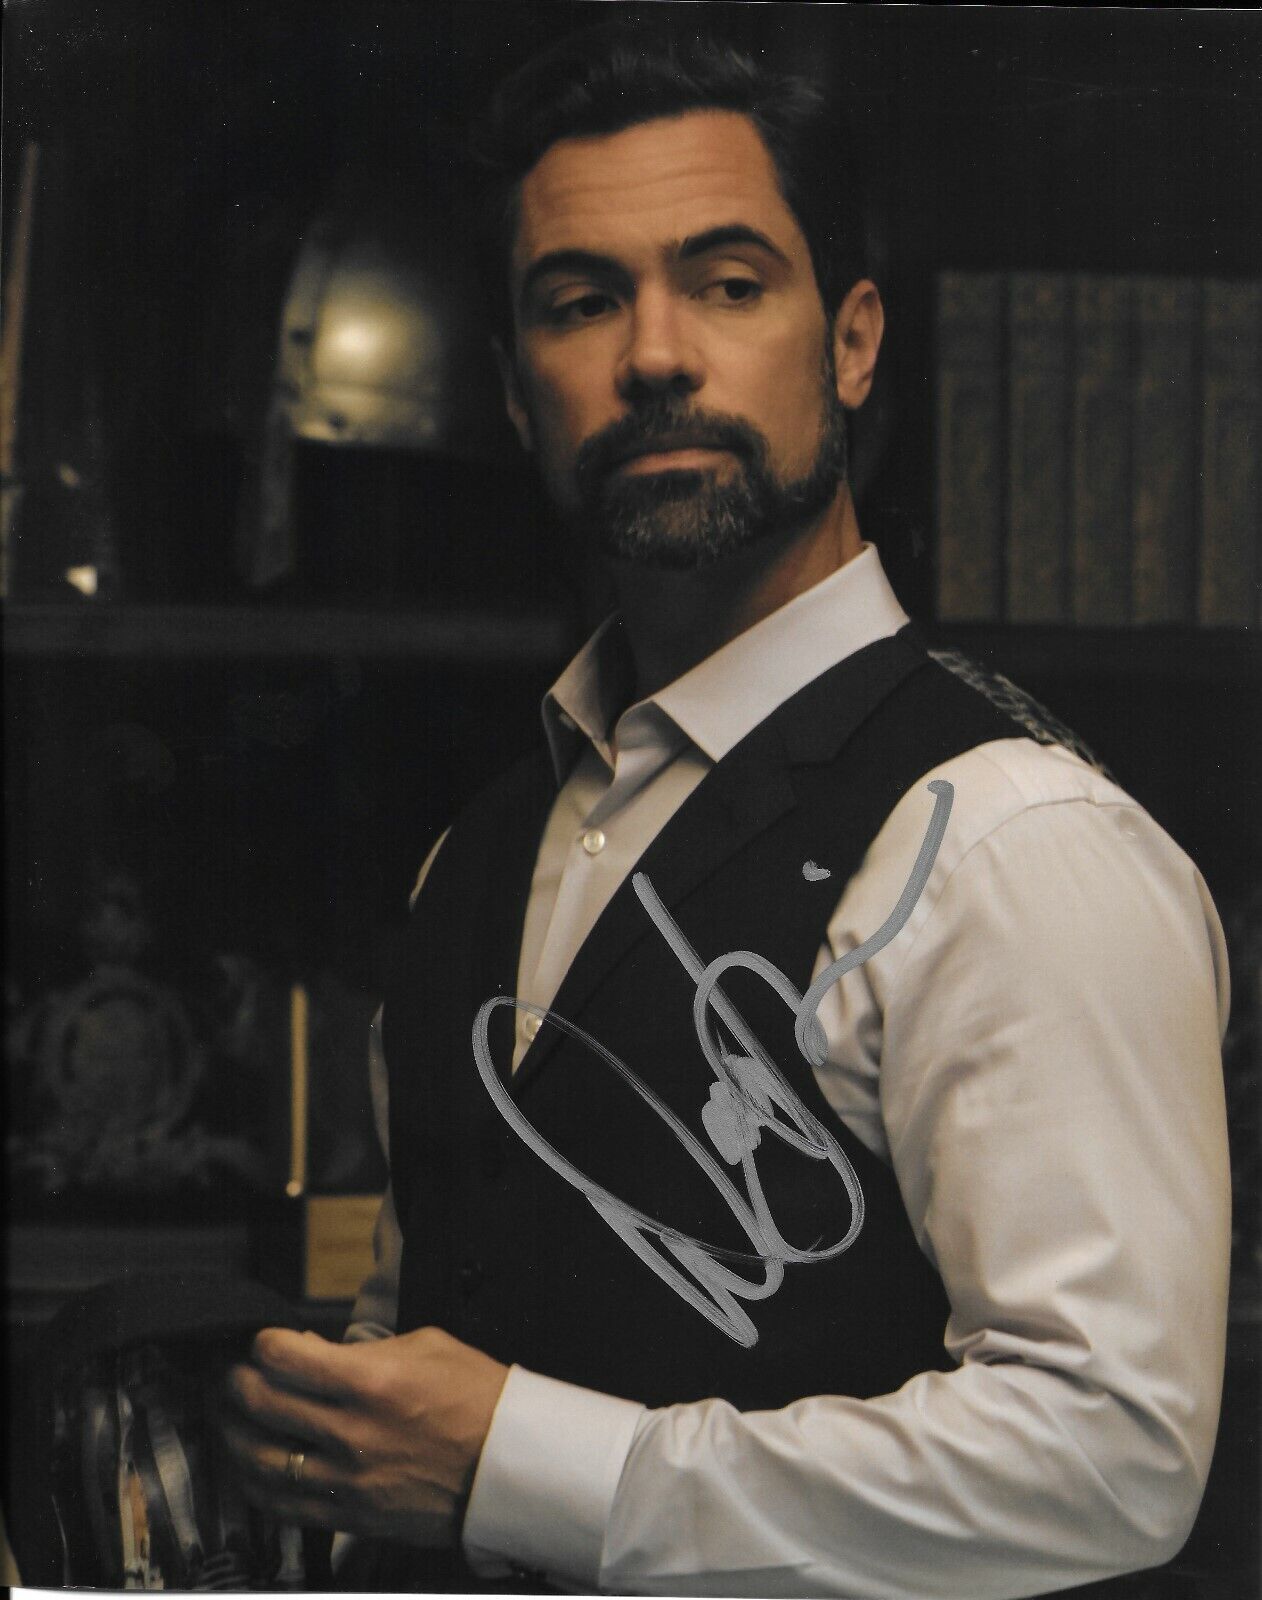 Danny Pino Mayans M.C. autographed Photo Poster painting signed 8x10 #12 Miguel Galindo